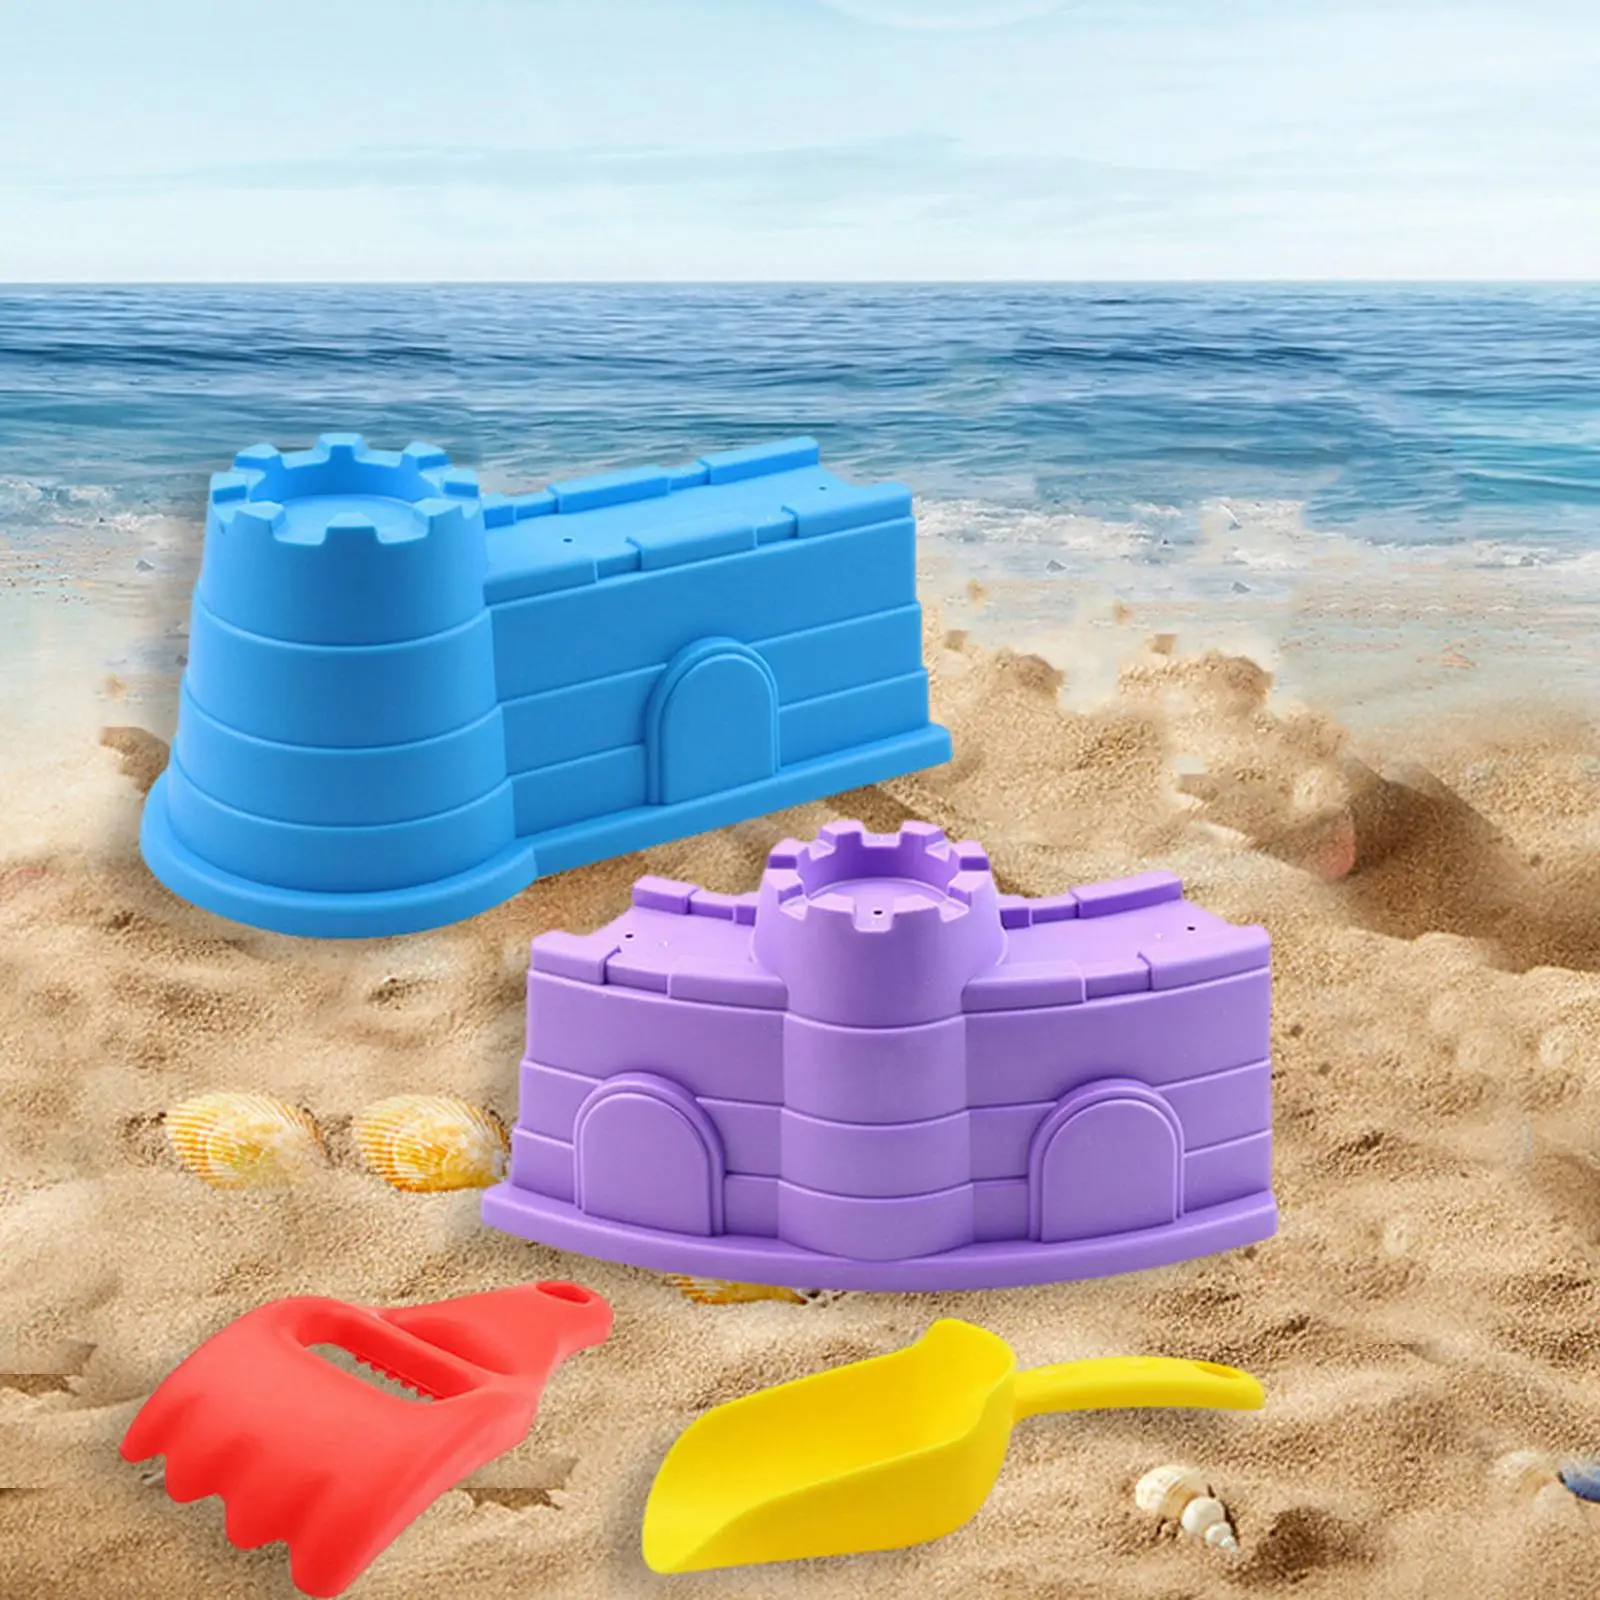 Sand Castle Play Set for Kids Sand Gadgets Snow Toys Sand Castle Toys for Beach for Children Adults Toddlers Girls Boys Winter